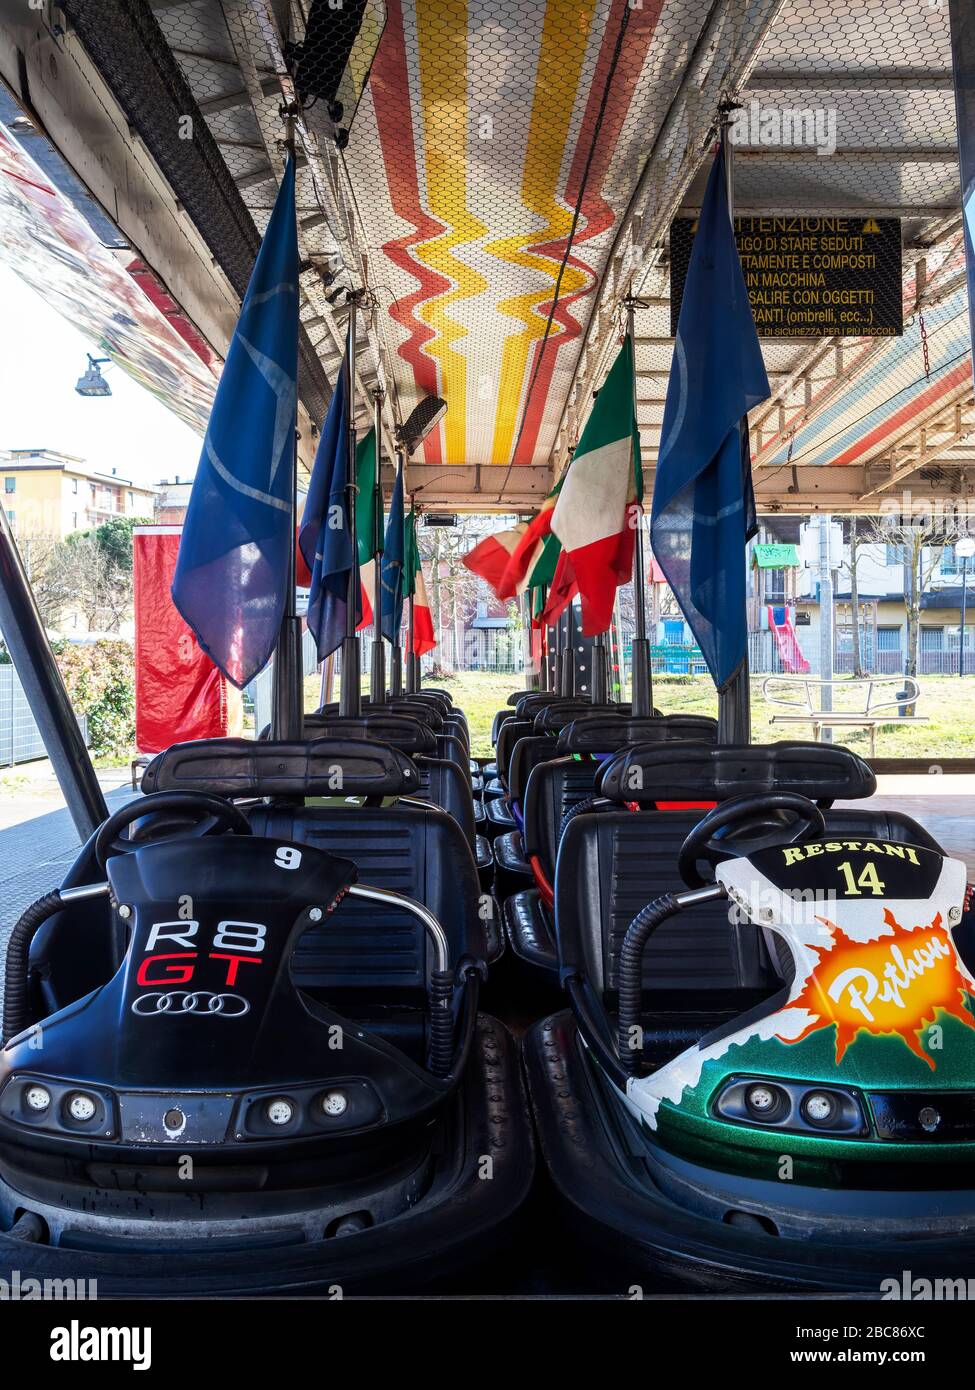 AULLA, ITALY- February 12 2020: Rows of Dodgem aka Bumper Cars parked up in Fun Fair Amusement Park. With Italian flag. Stock Photo